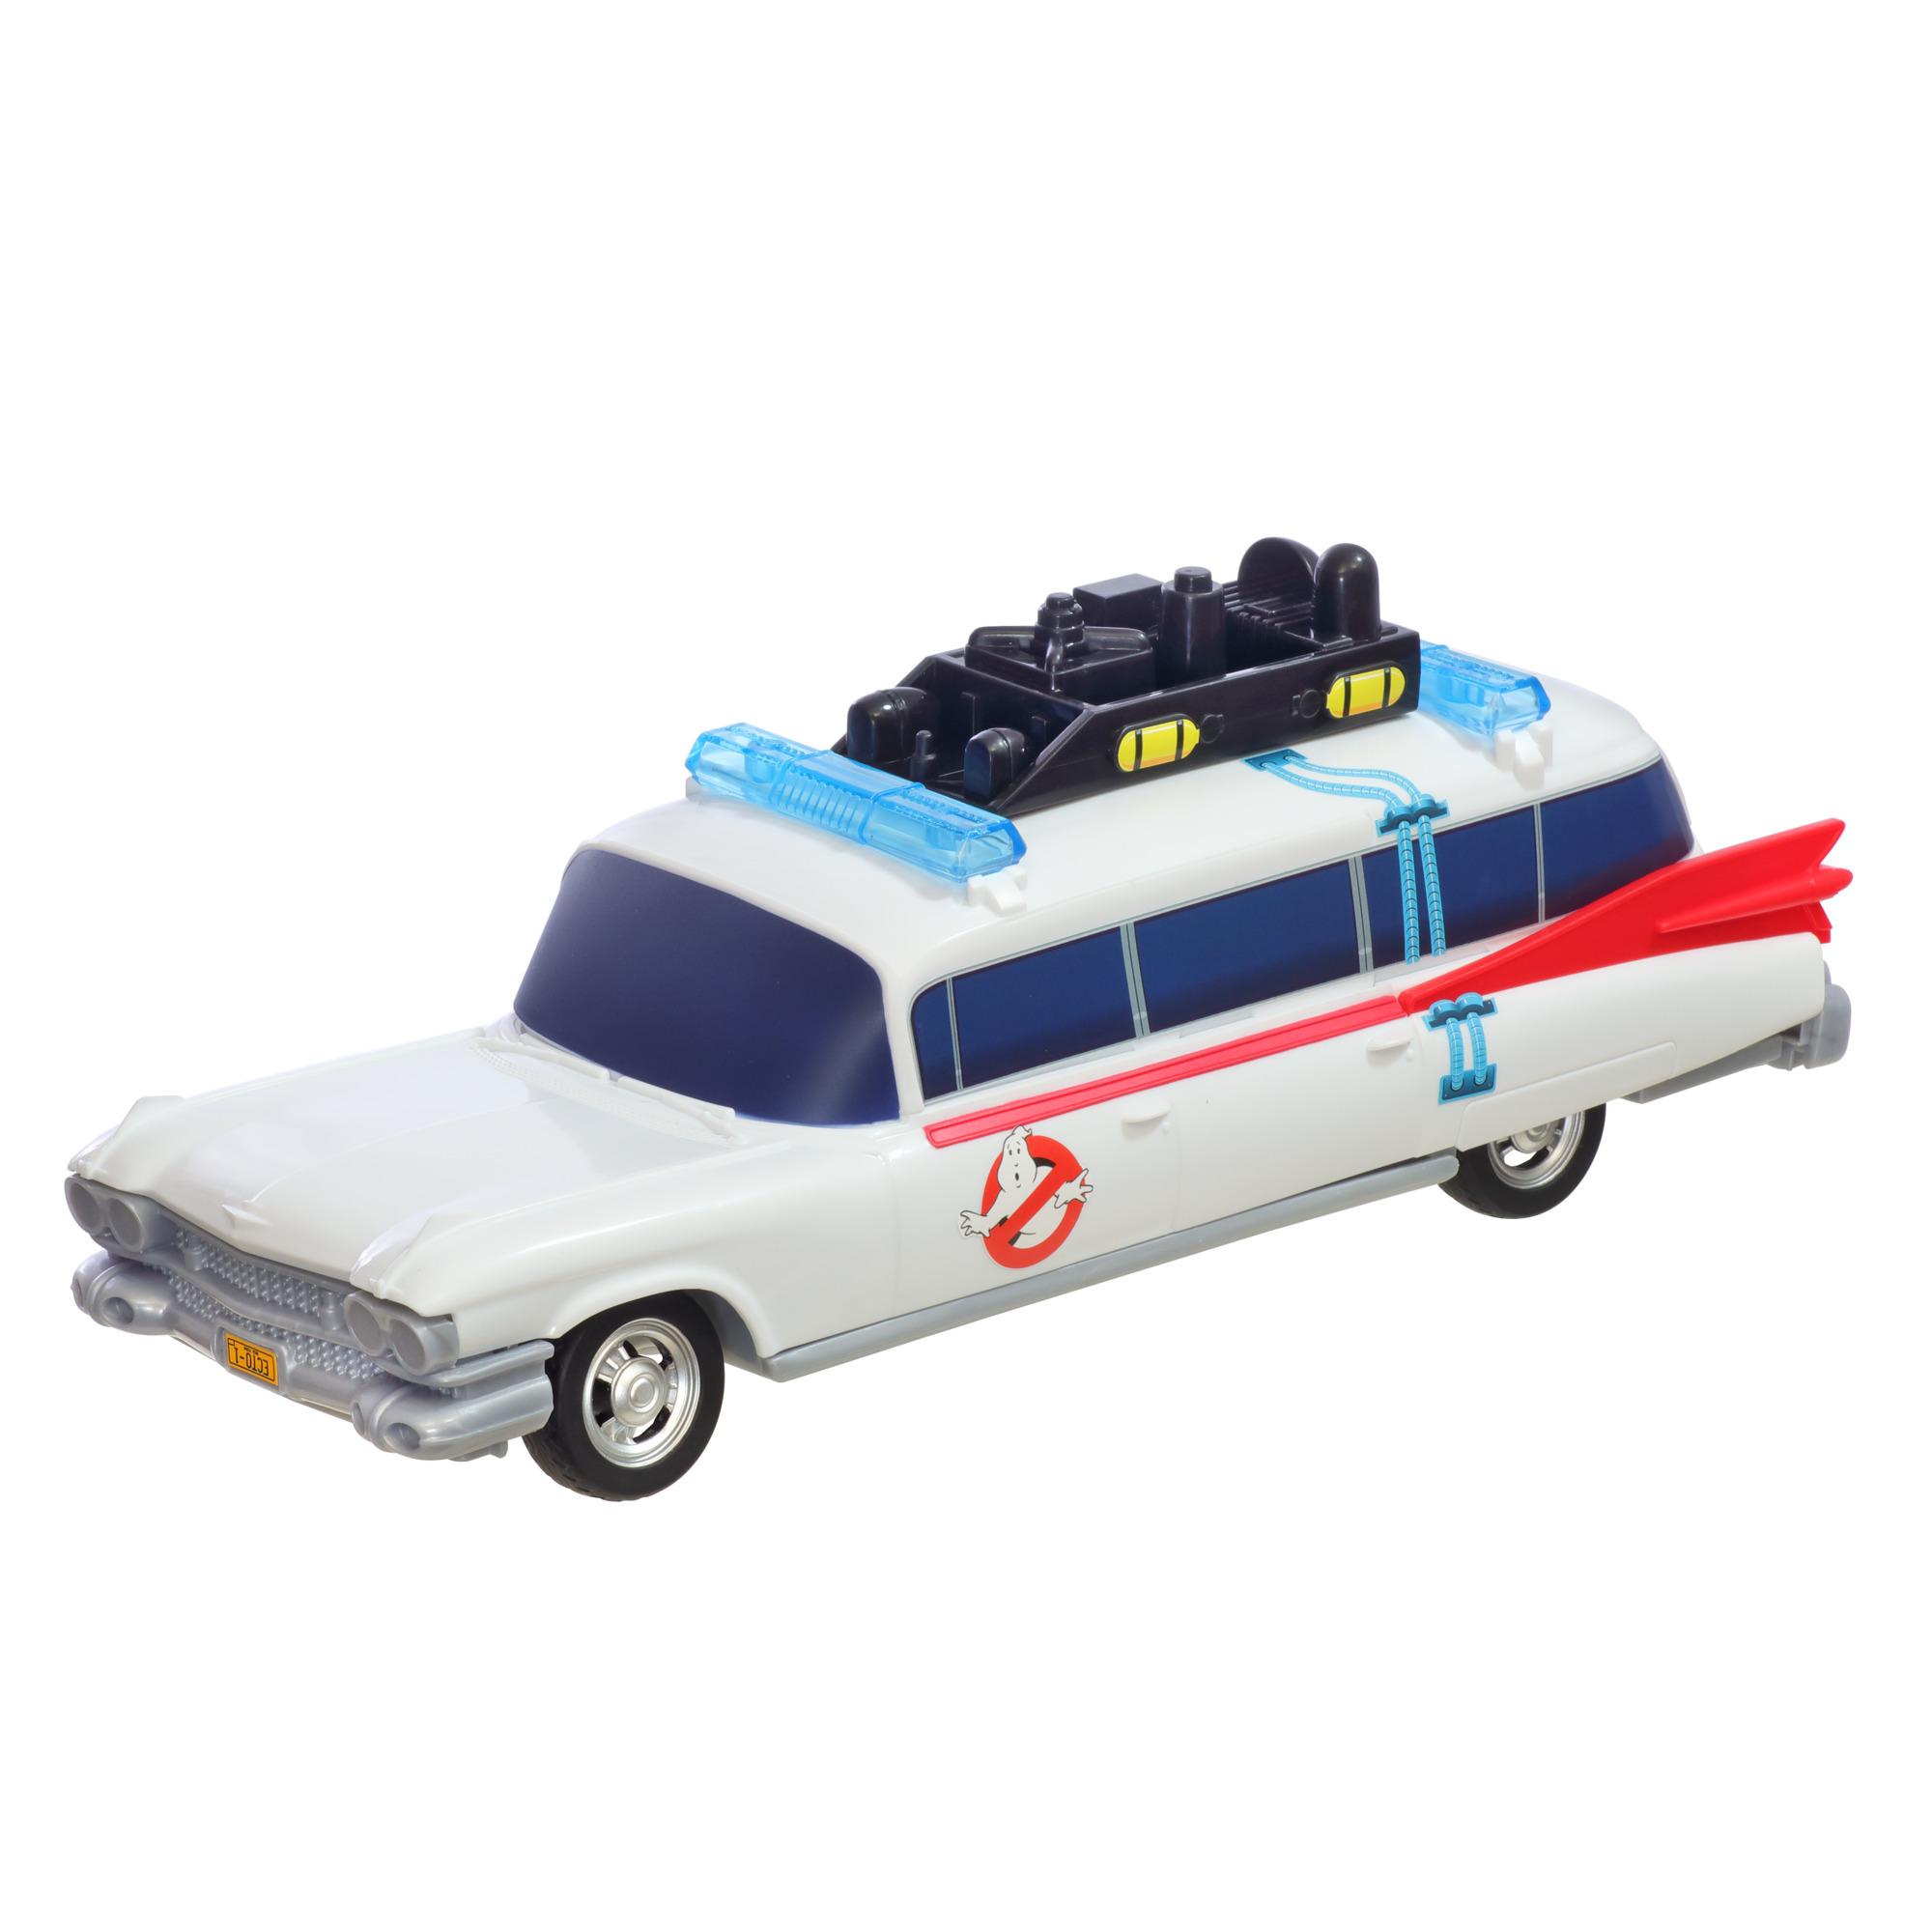 Ghostbusters Movie Ecto-1 Vehicle Toy for Kids Ages 4 and Up Classic ... Ghostbusters Toy